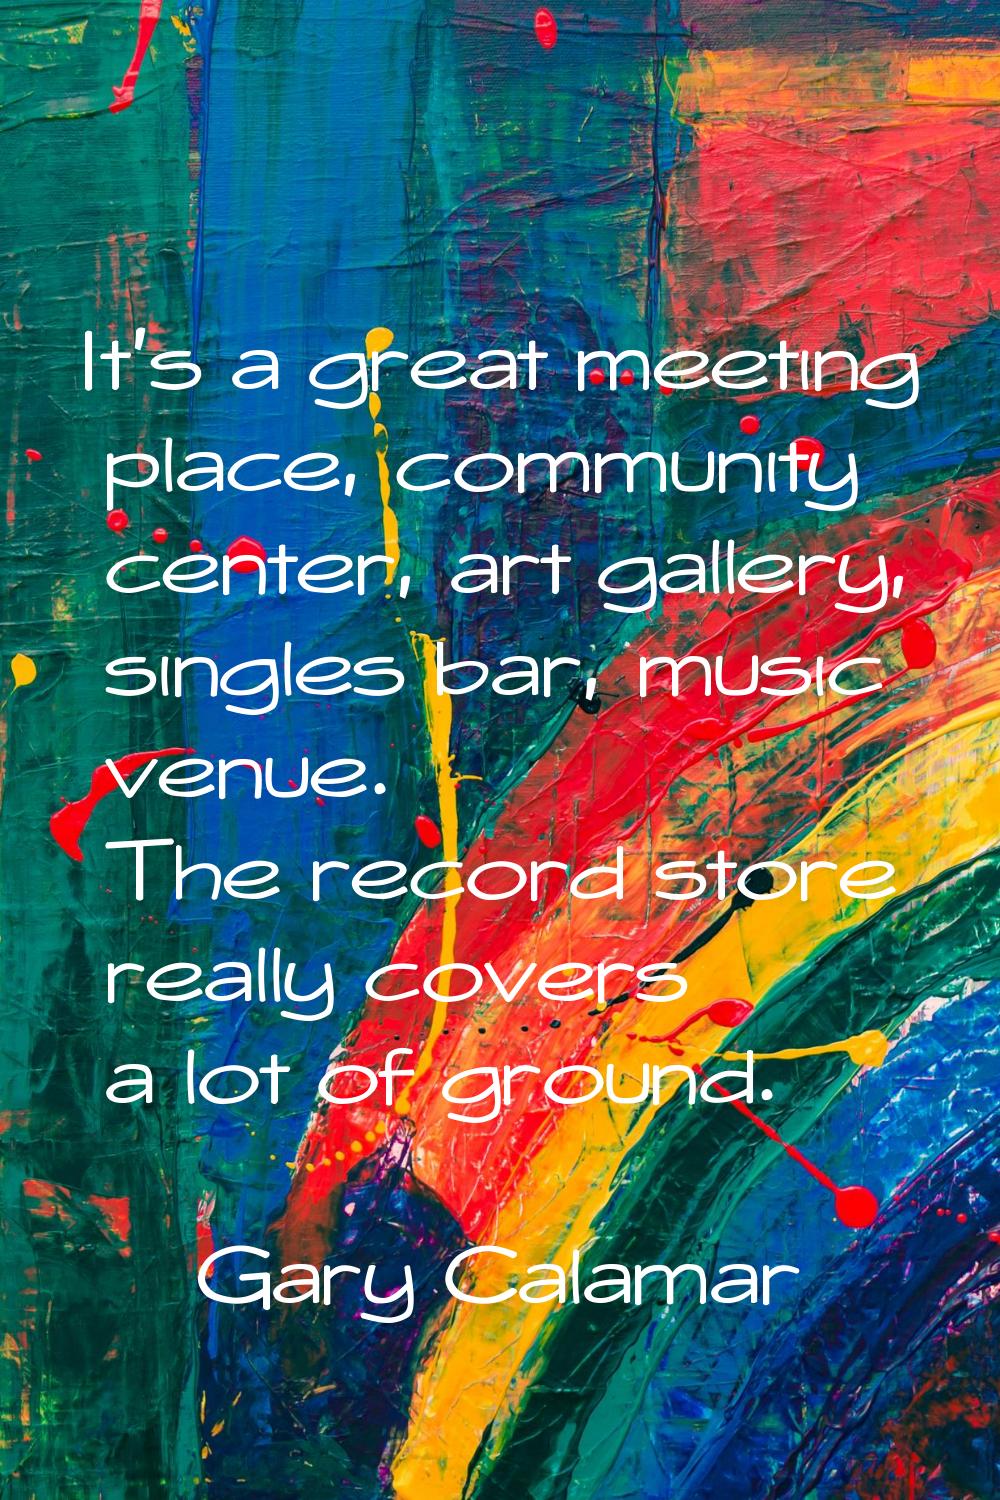 It's a great meeting place, community center, art gallery, singles bar, music venue. The record sto